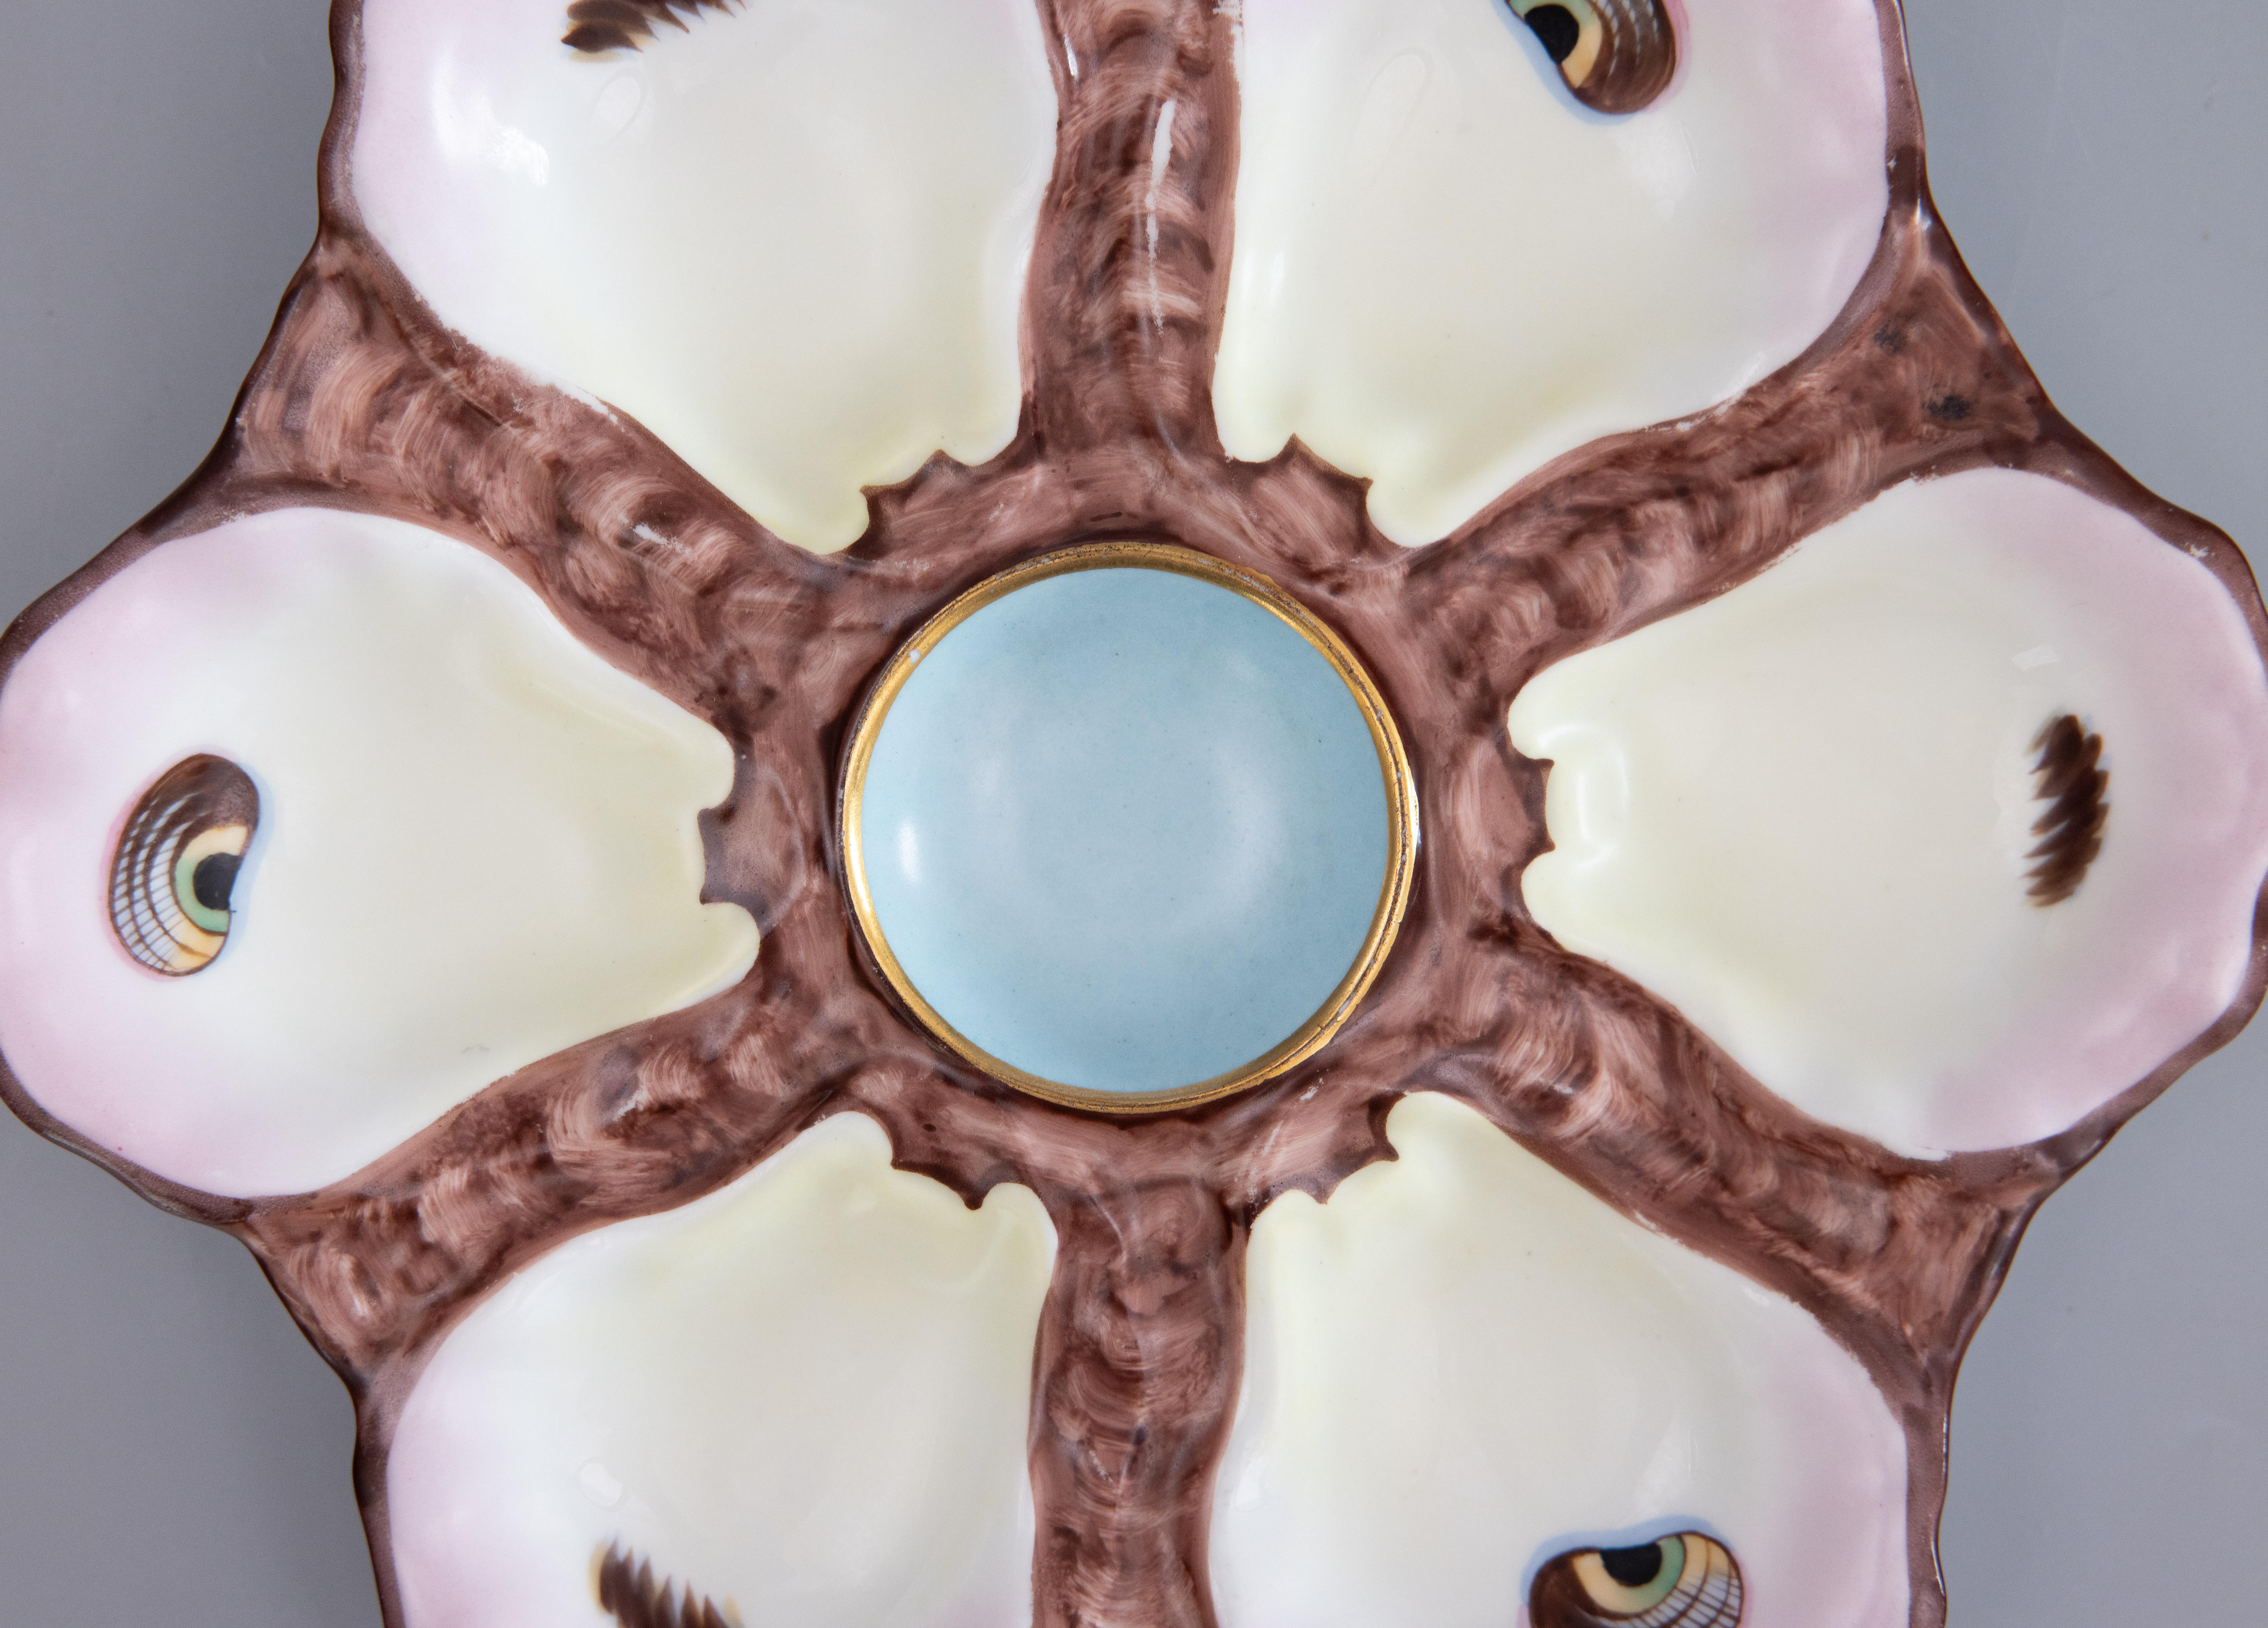 A gorgeous antique 19th-Century French majolica porcelain oyster plate. This fine quality oyster plate has six wells with hand painted 'eyes,' a soft blush pink tint on the edges, and a lovely robin egg blue center. It displays beautifully and would